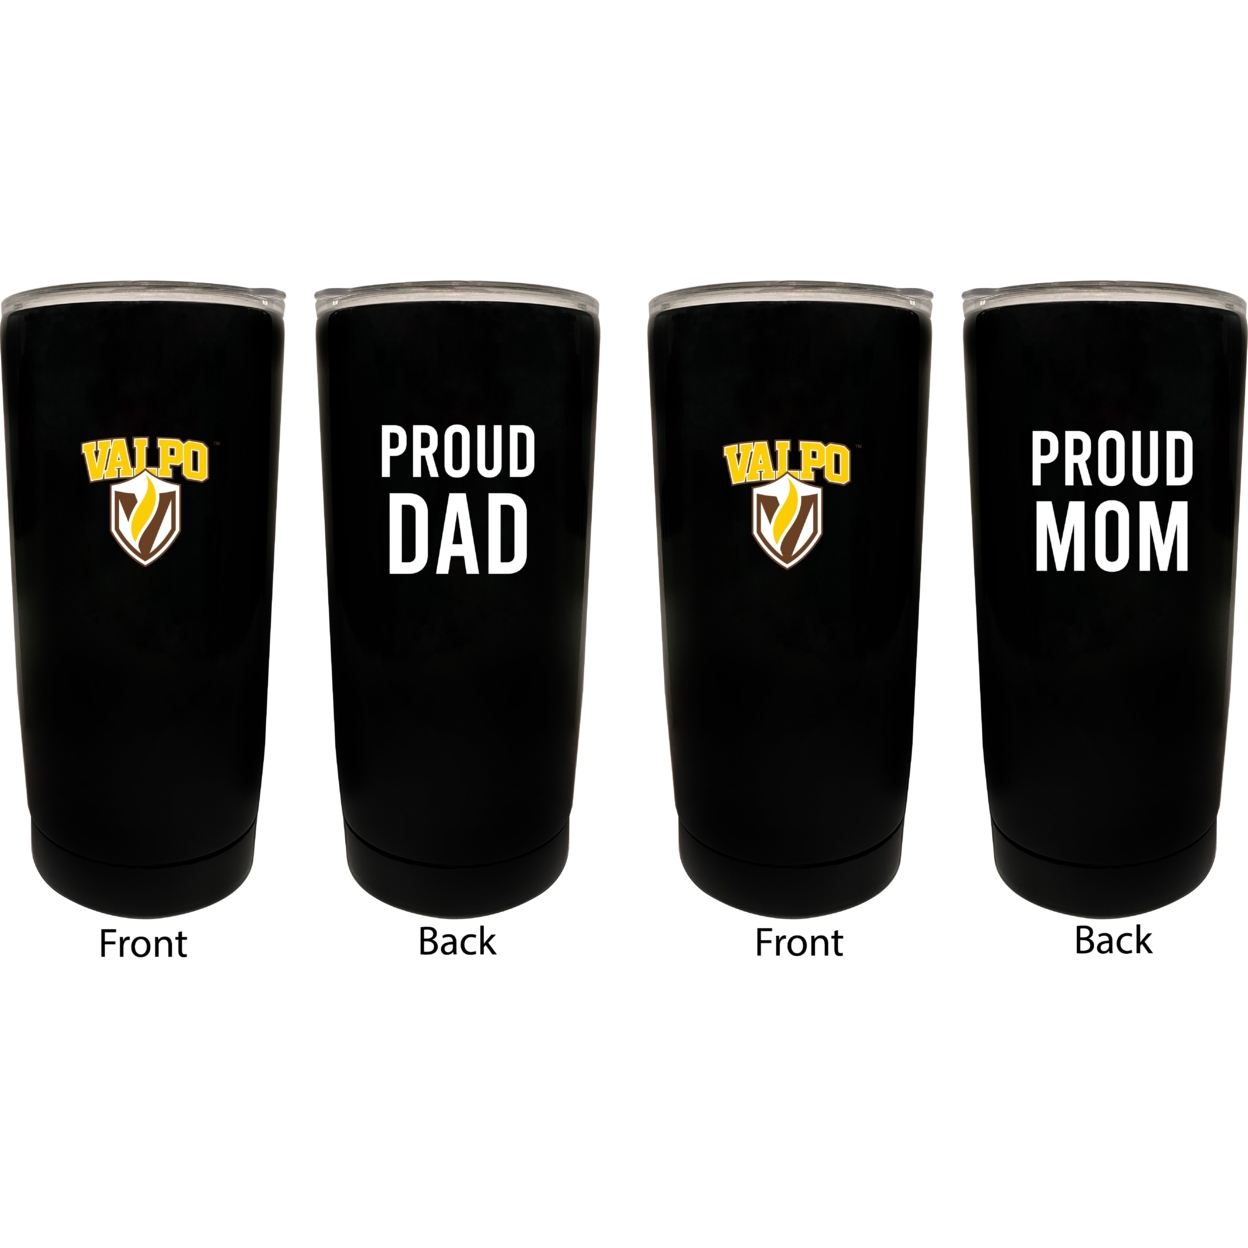 Valparaiso University Proud Mom And Dad 16 Oz Insulated Stainless Steel Tumblers 2 Pack Black.